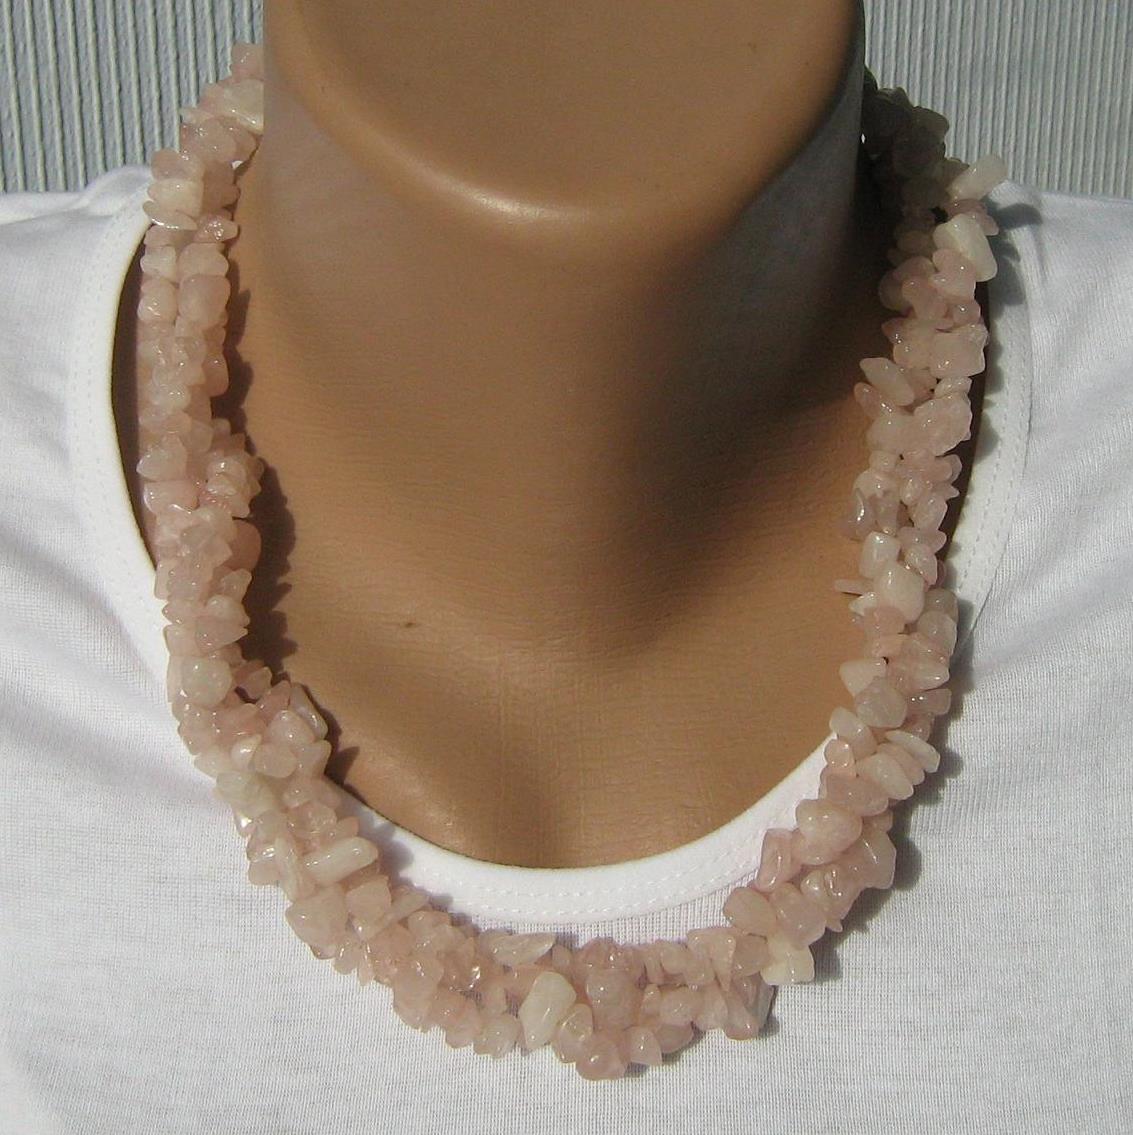 New natural pink quartz multistrand necklace with adjustable length.